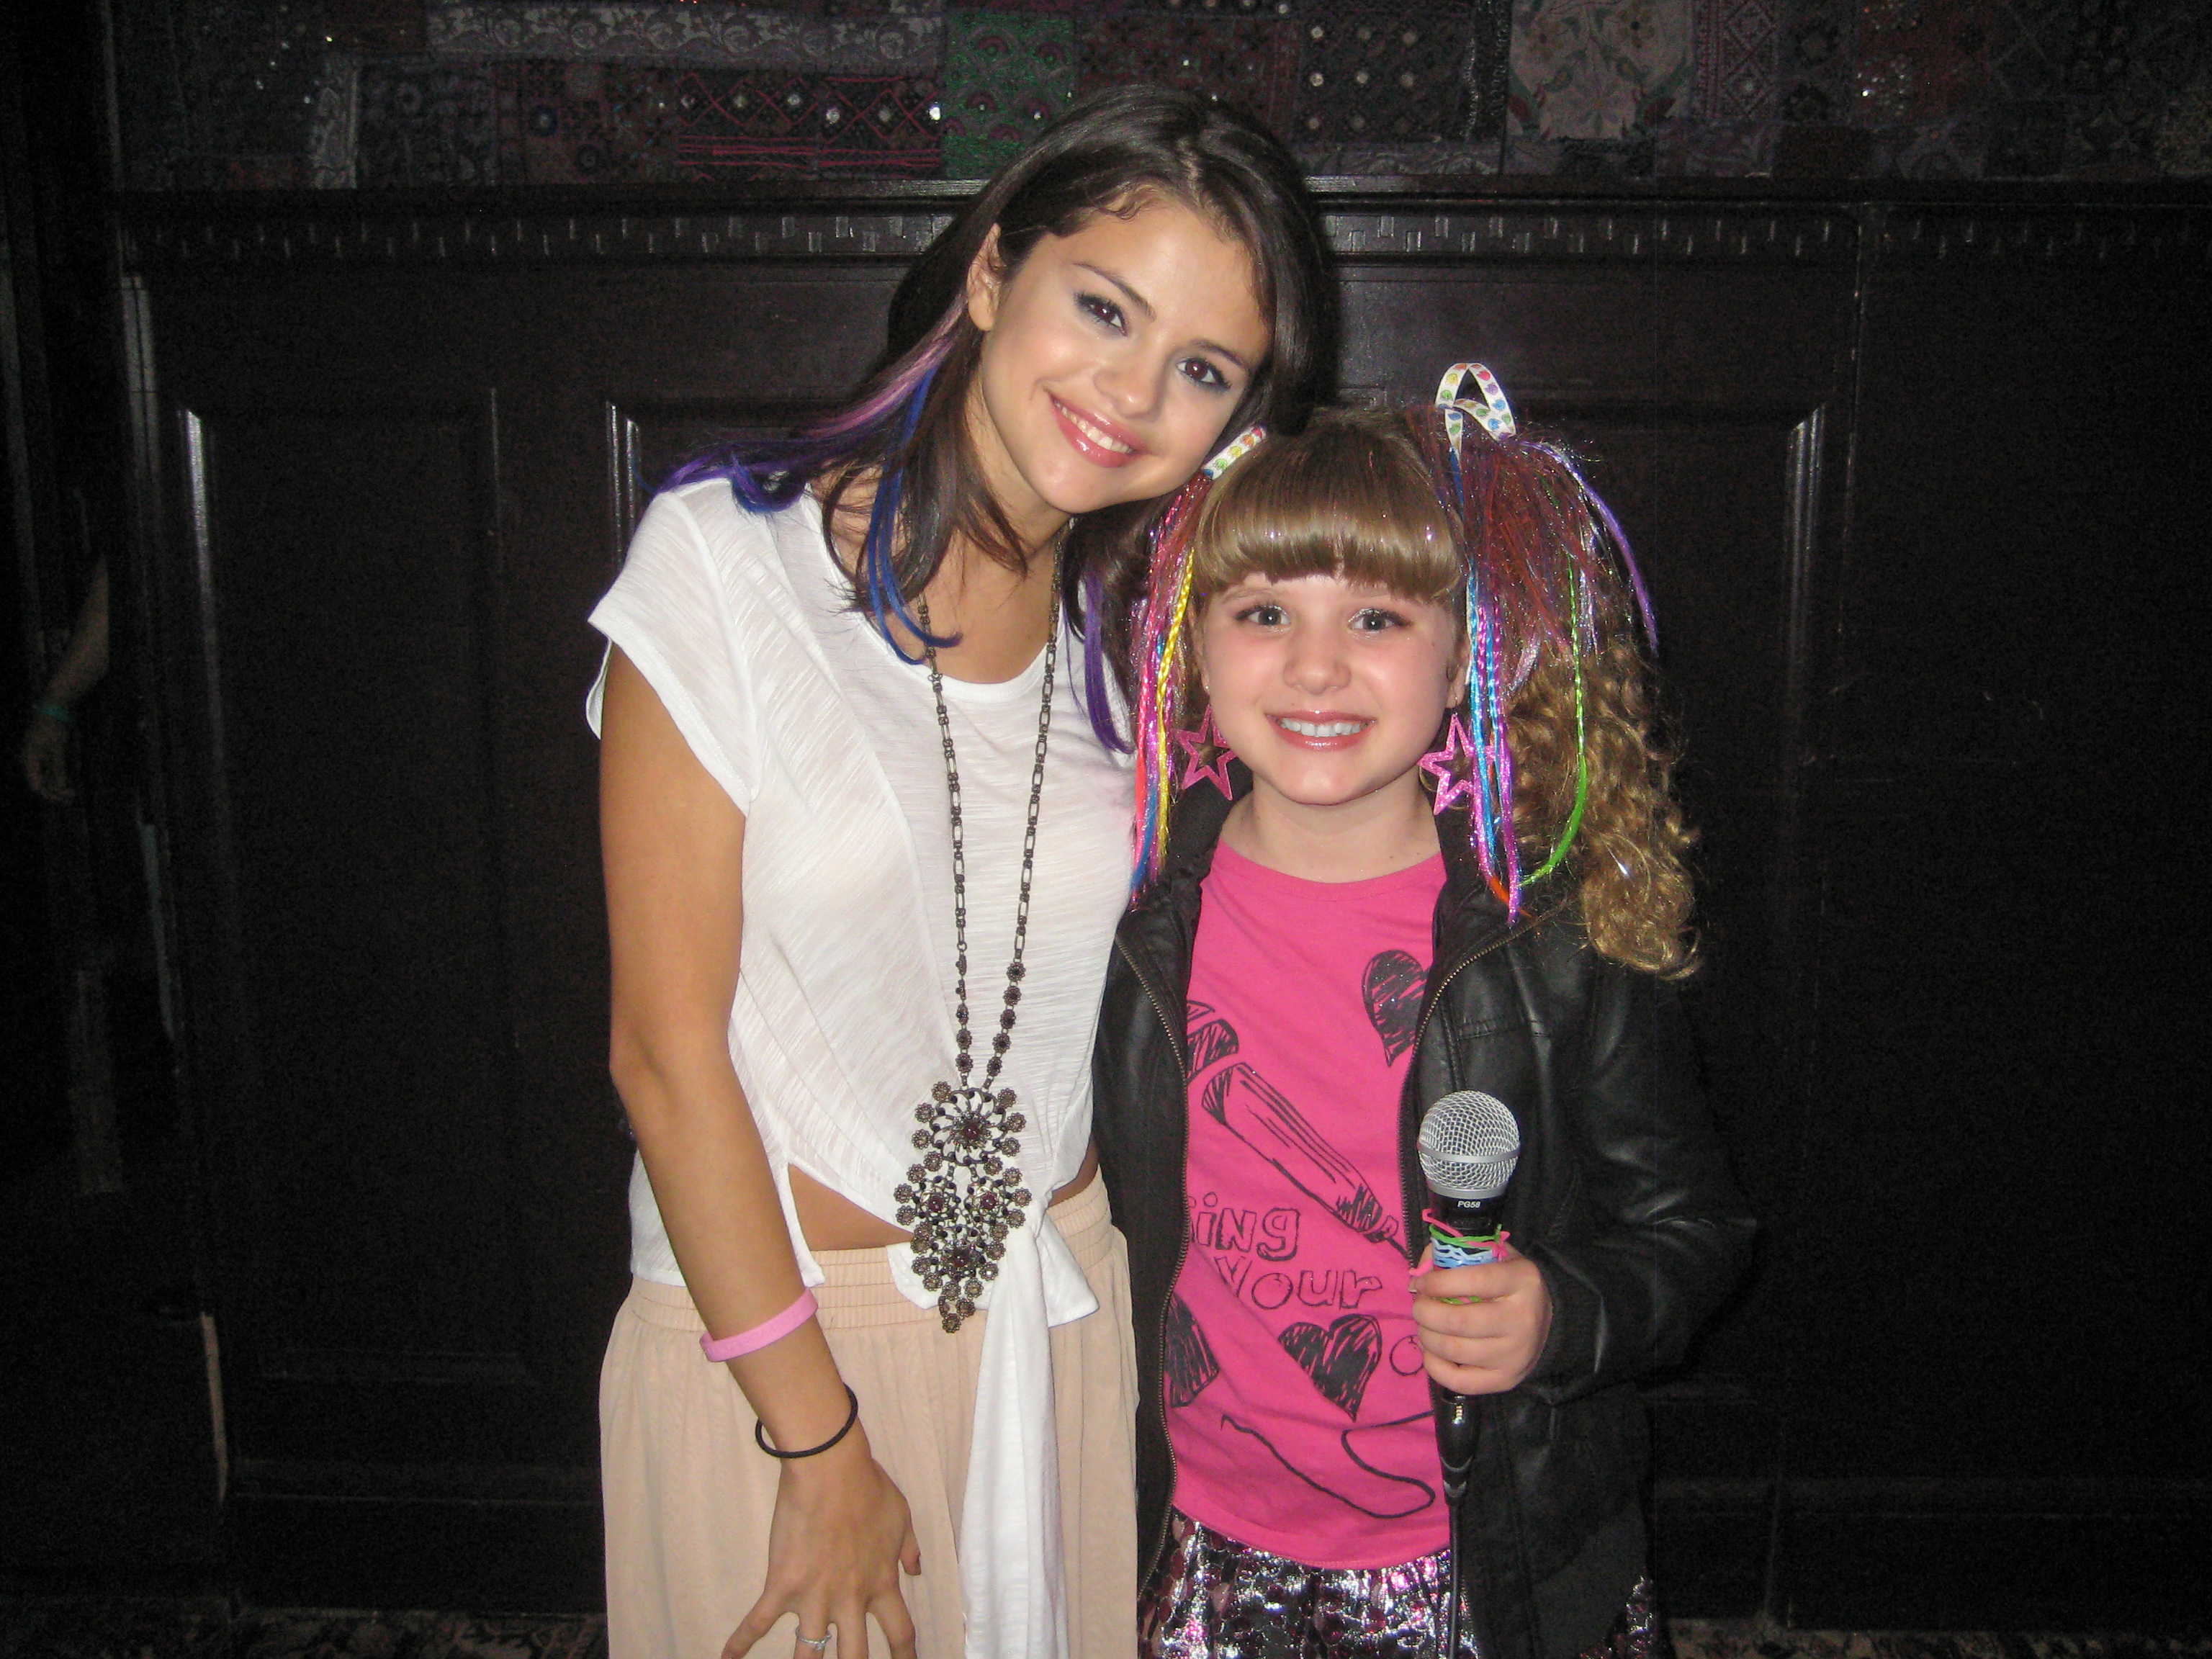 12-0120 Piper Reese interviewing Selena Gomez-Unicef Concert at House of Blues in Hollywood (small)